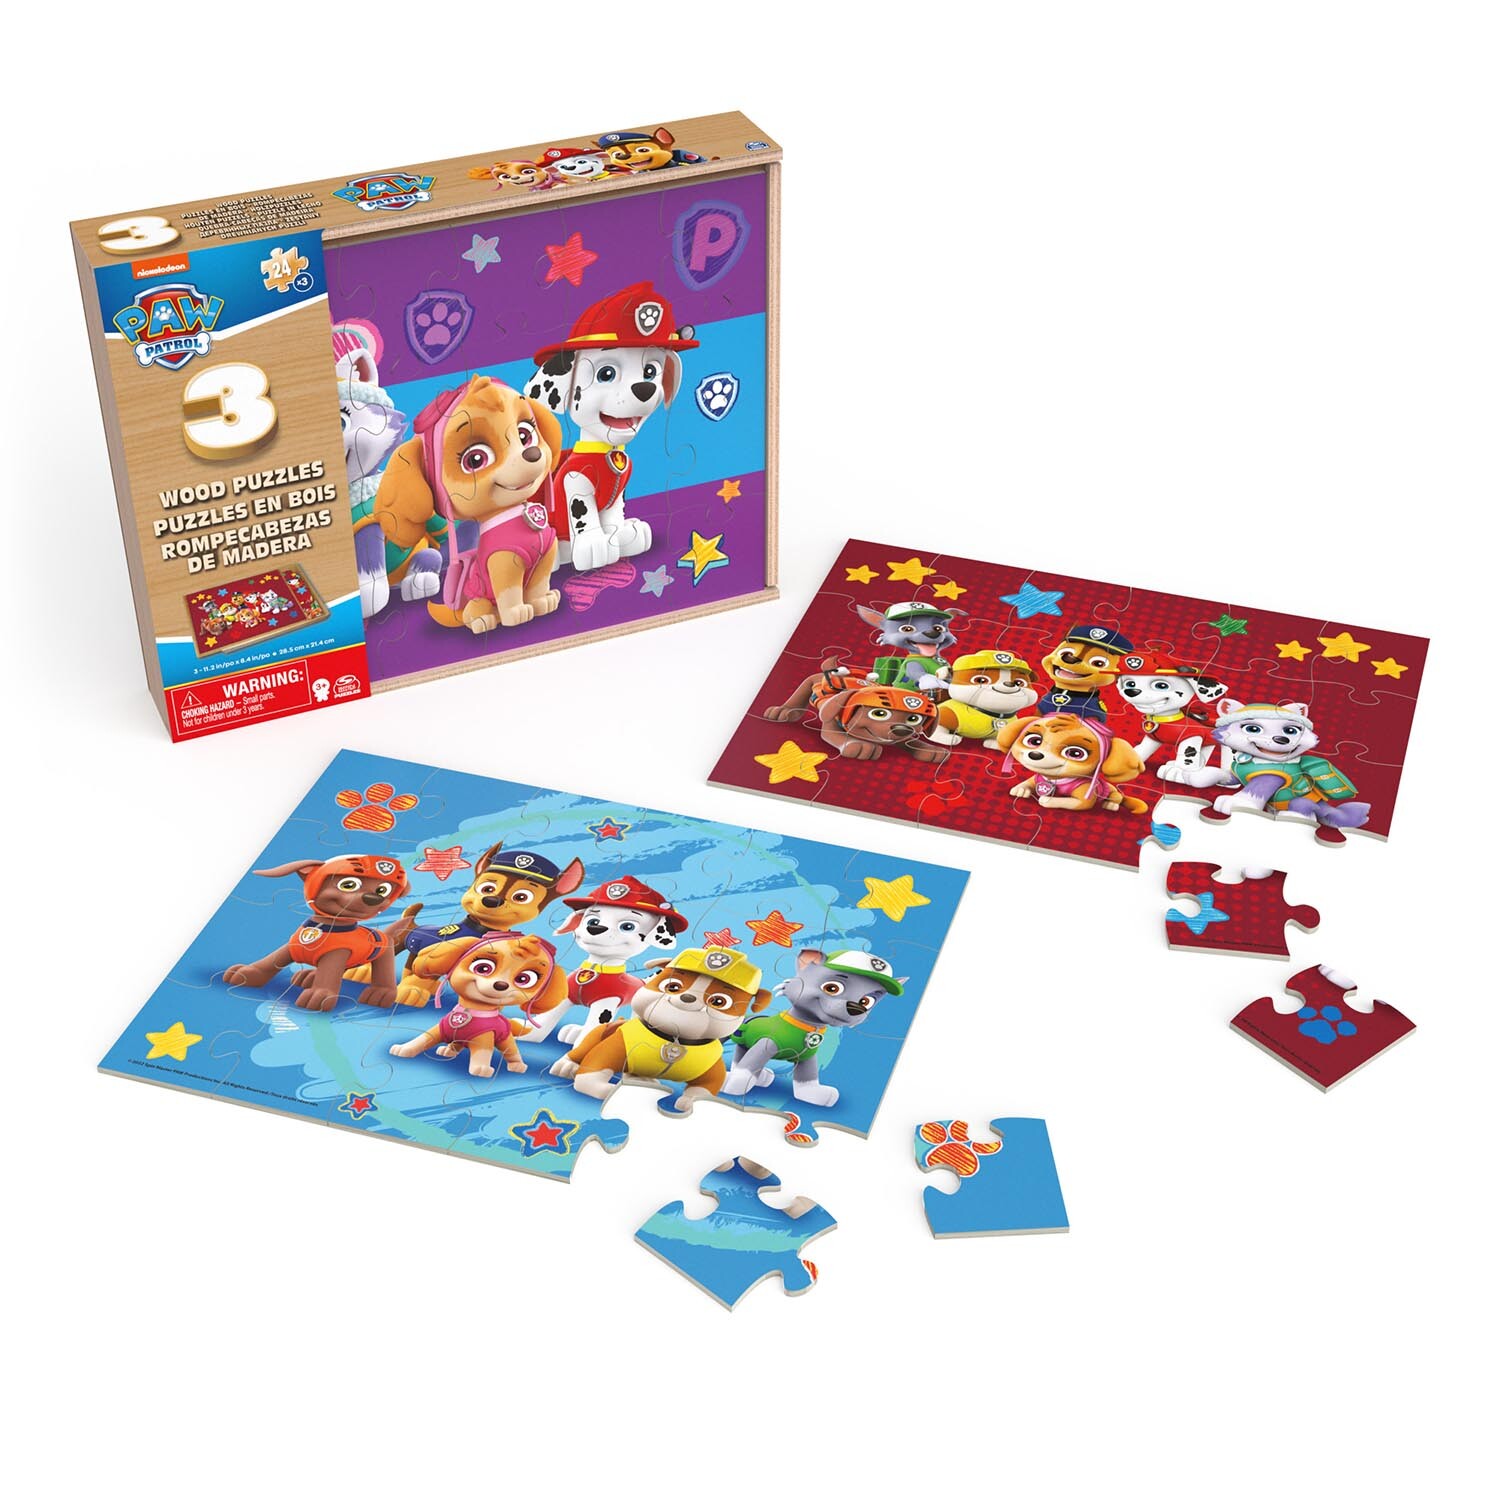 Pack of 3 Paw Patrol Wooden Puzzles Image 4